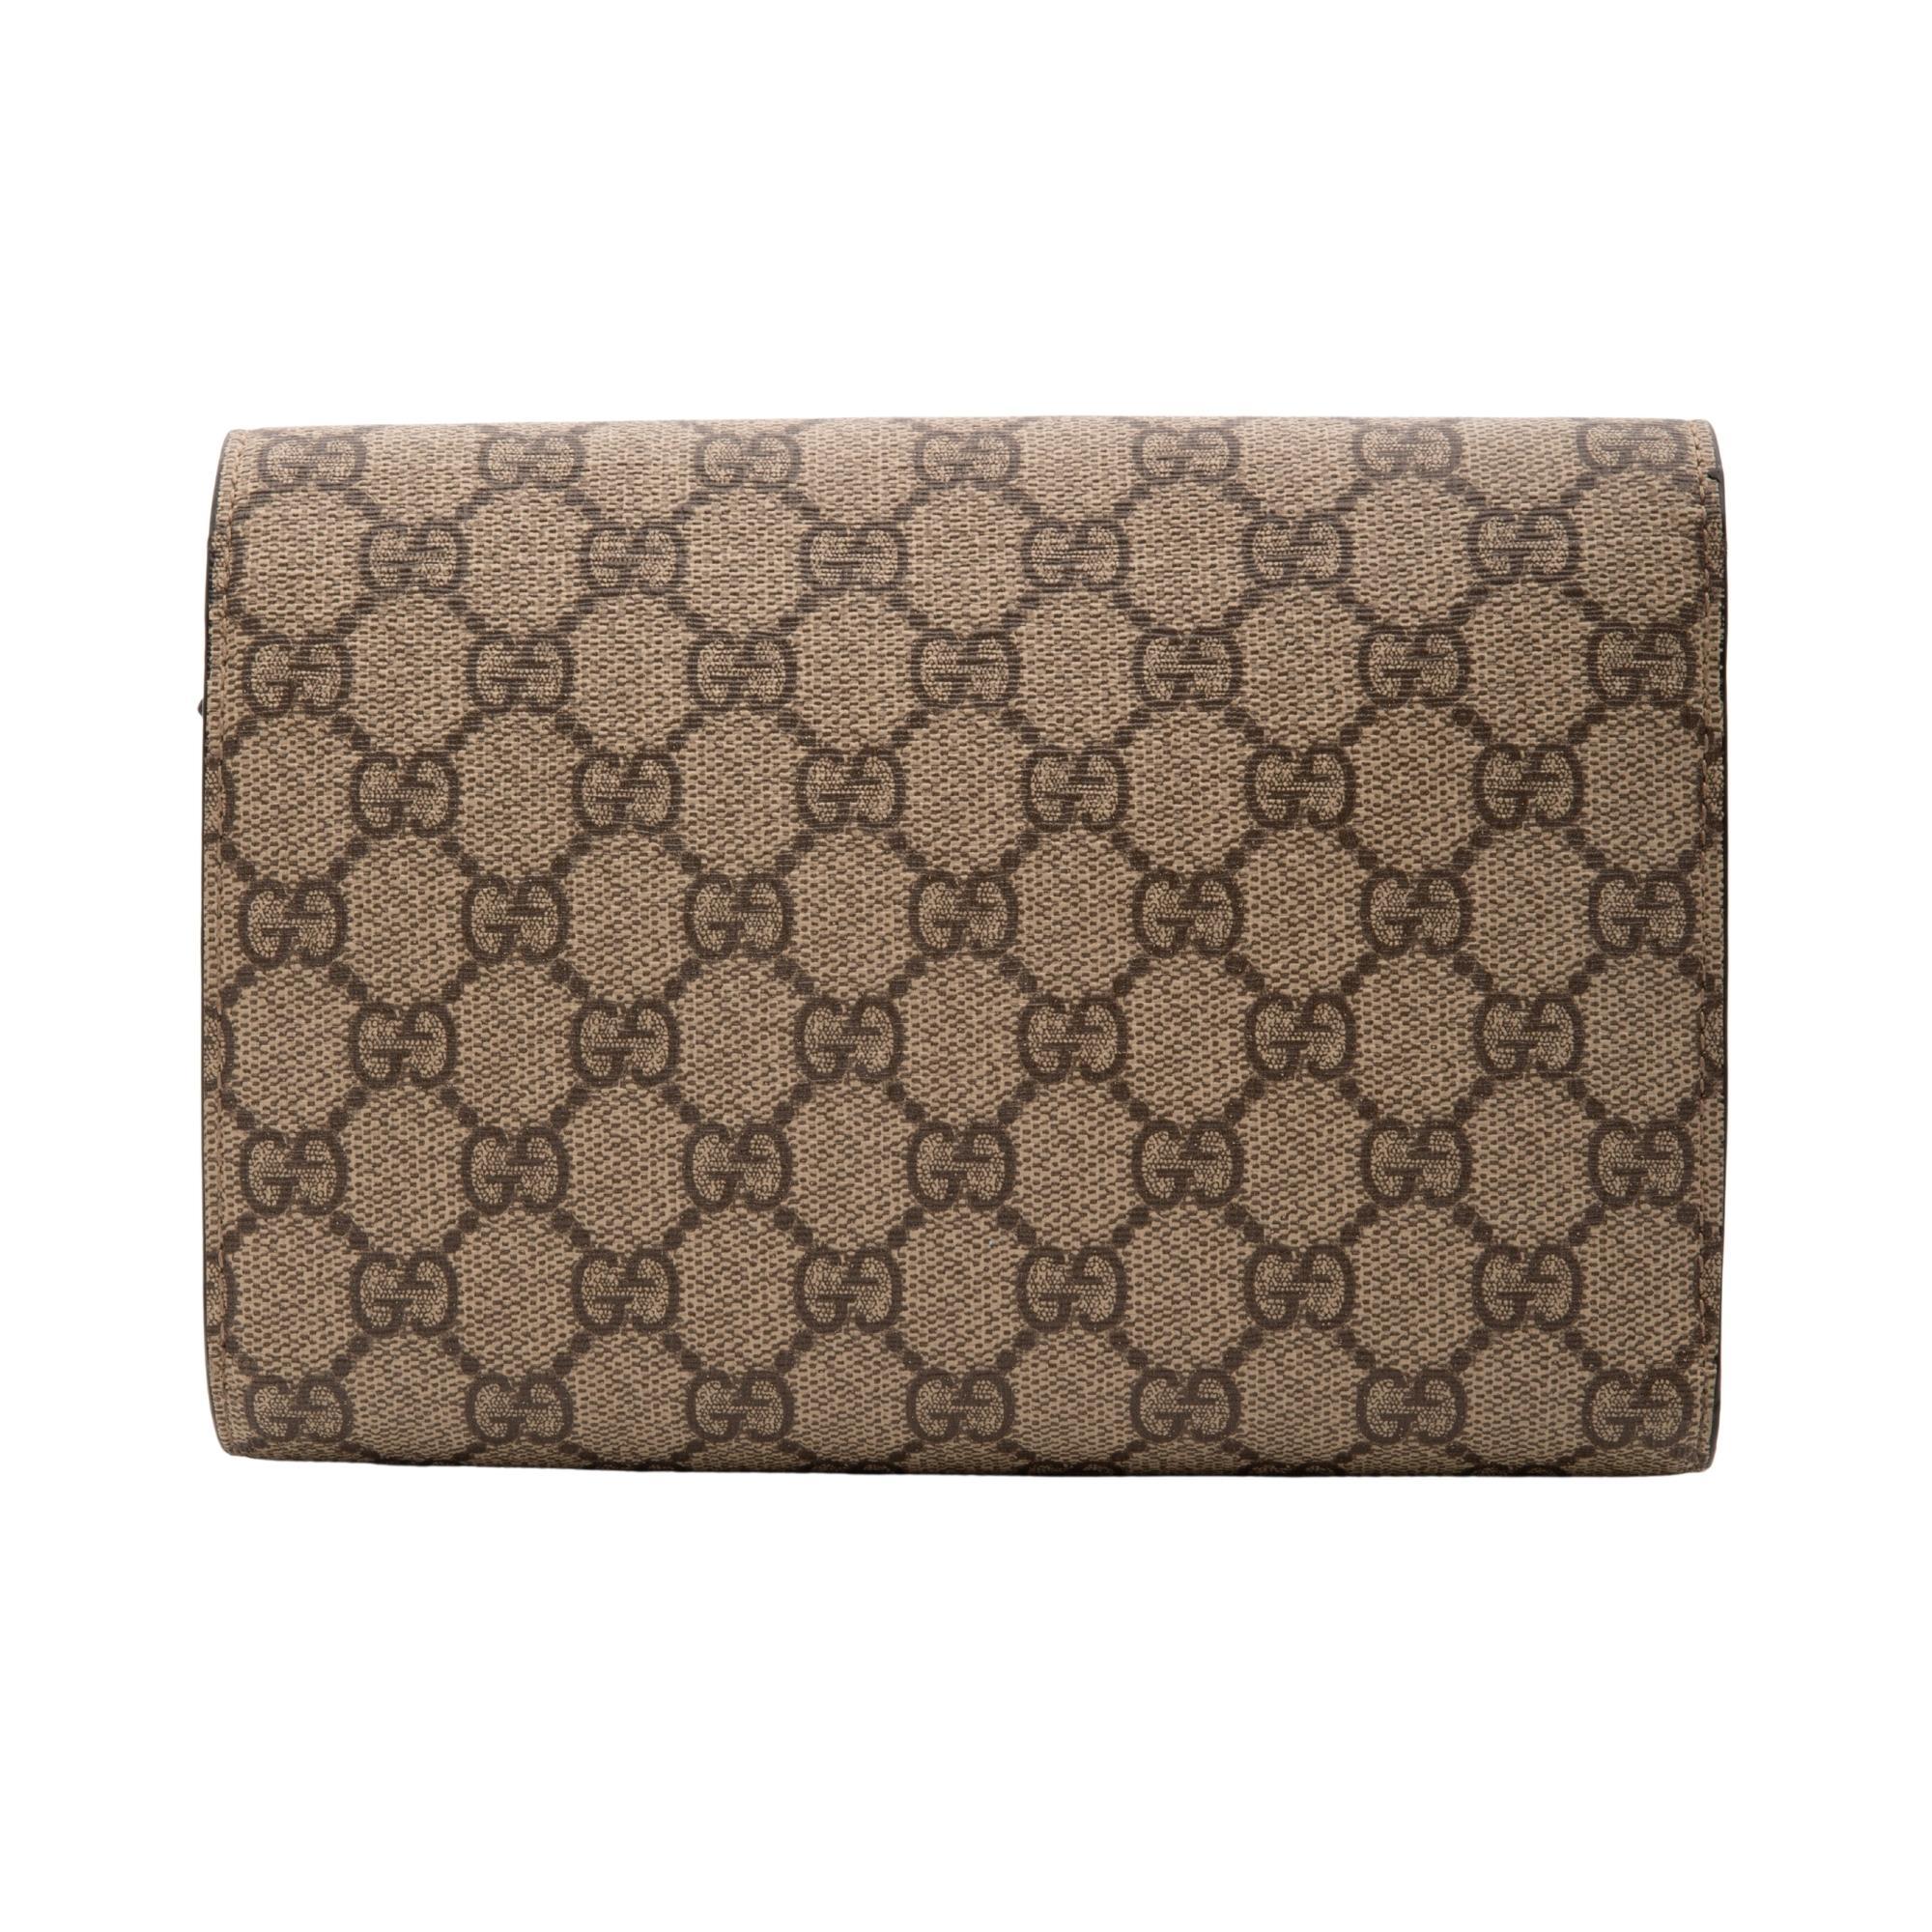 This structured crossbody wallet on chain bag from Gucci is made with GG Supreme canvas and features a textured tiger head spur on the front flap, antiqued silver-toned hardware, 16 card slots and two bill compartments, three separate interior